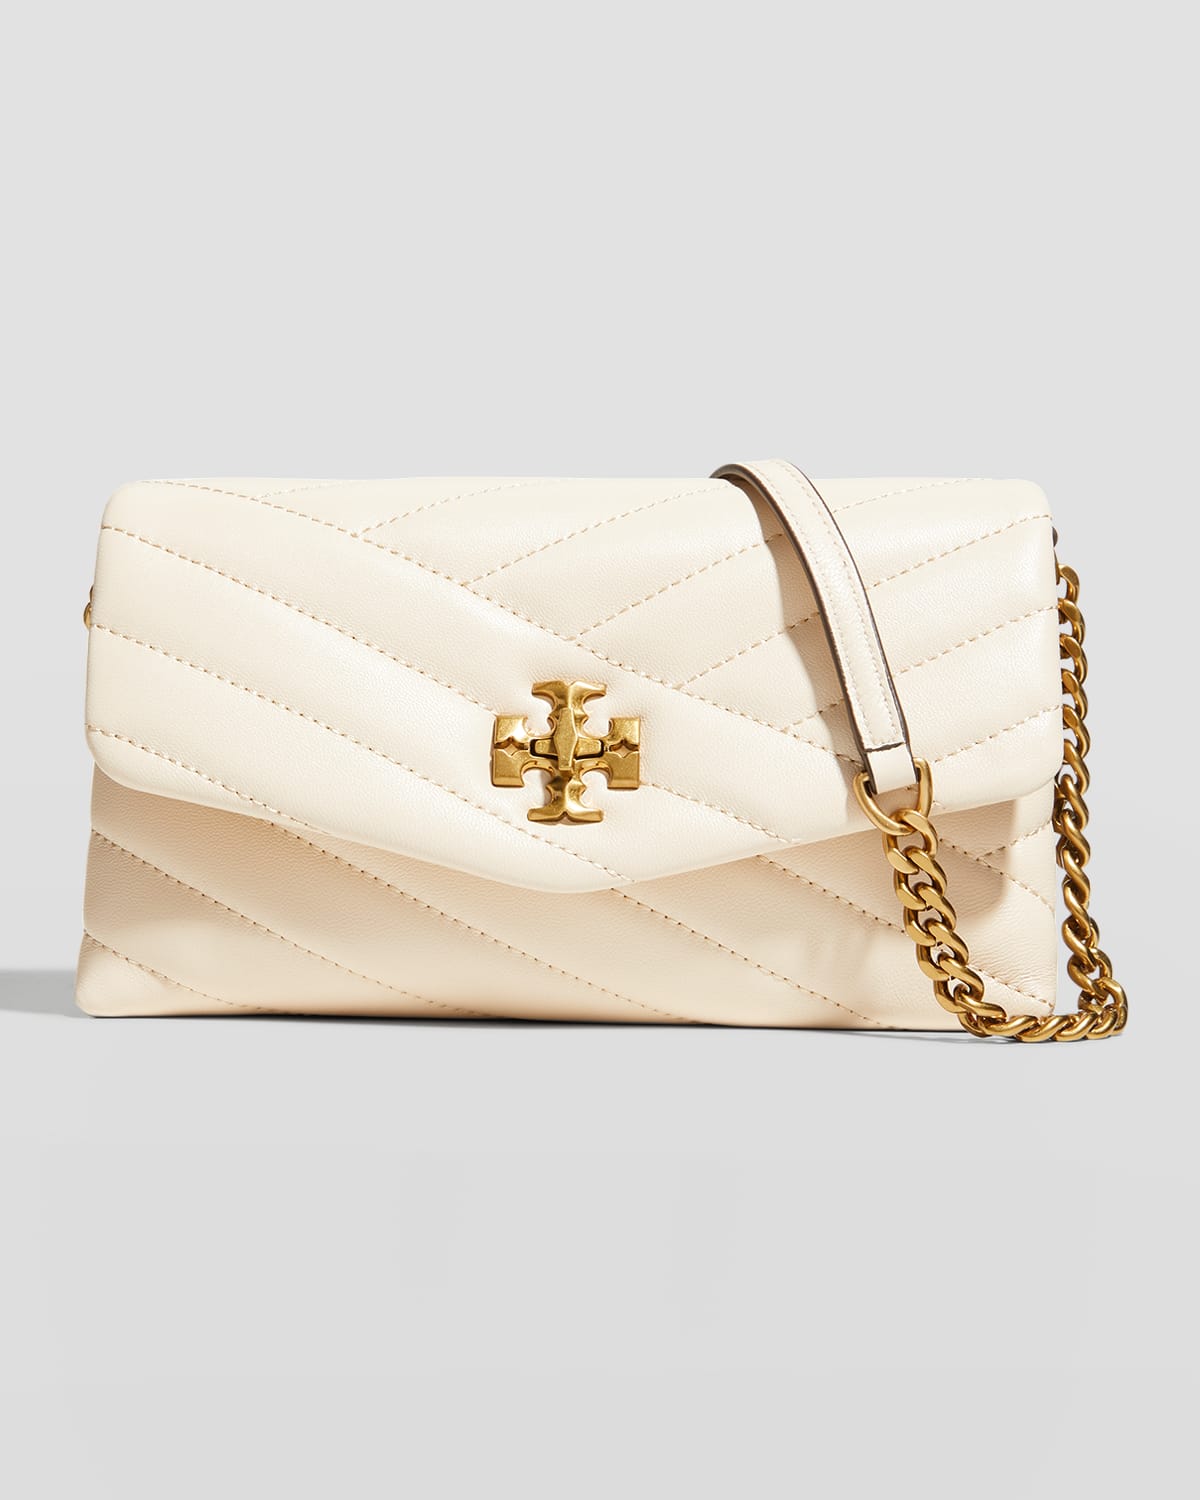 Tory Burch Kira Chevron-Quilted Leather Crossbody Bag